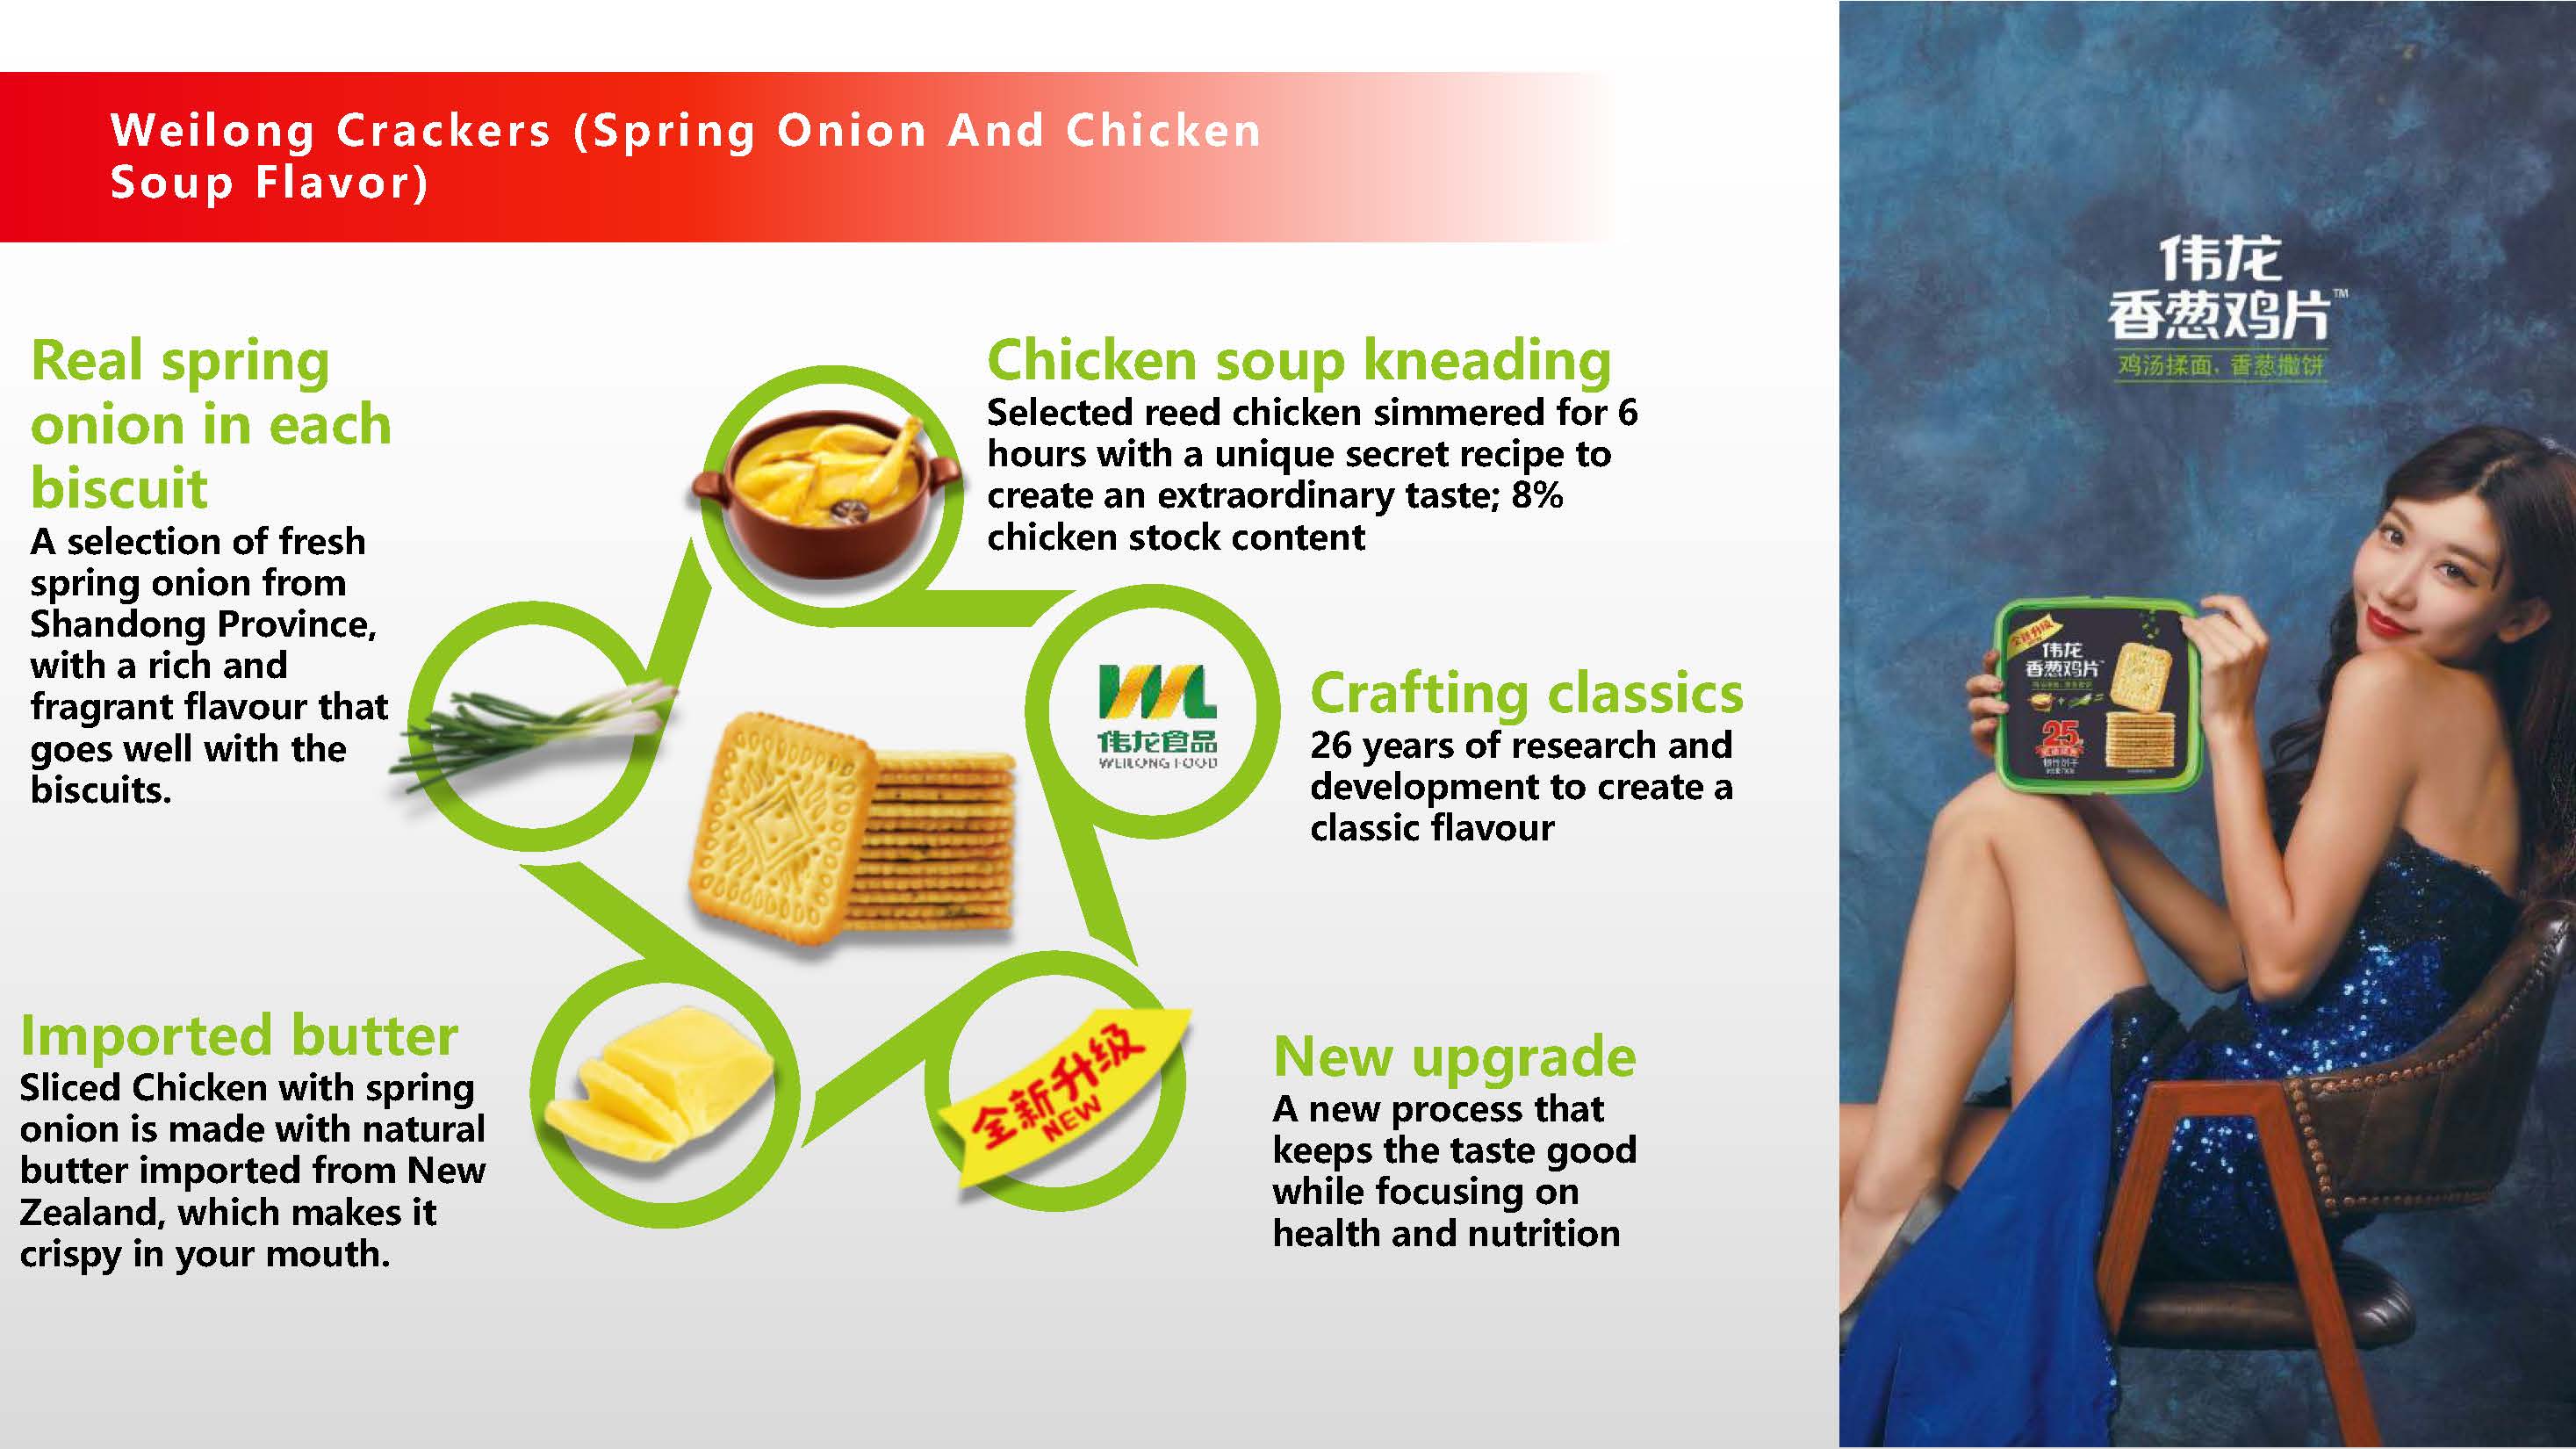 Spring onion and chicken soup flavor cracker